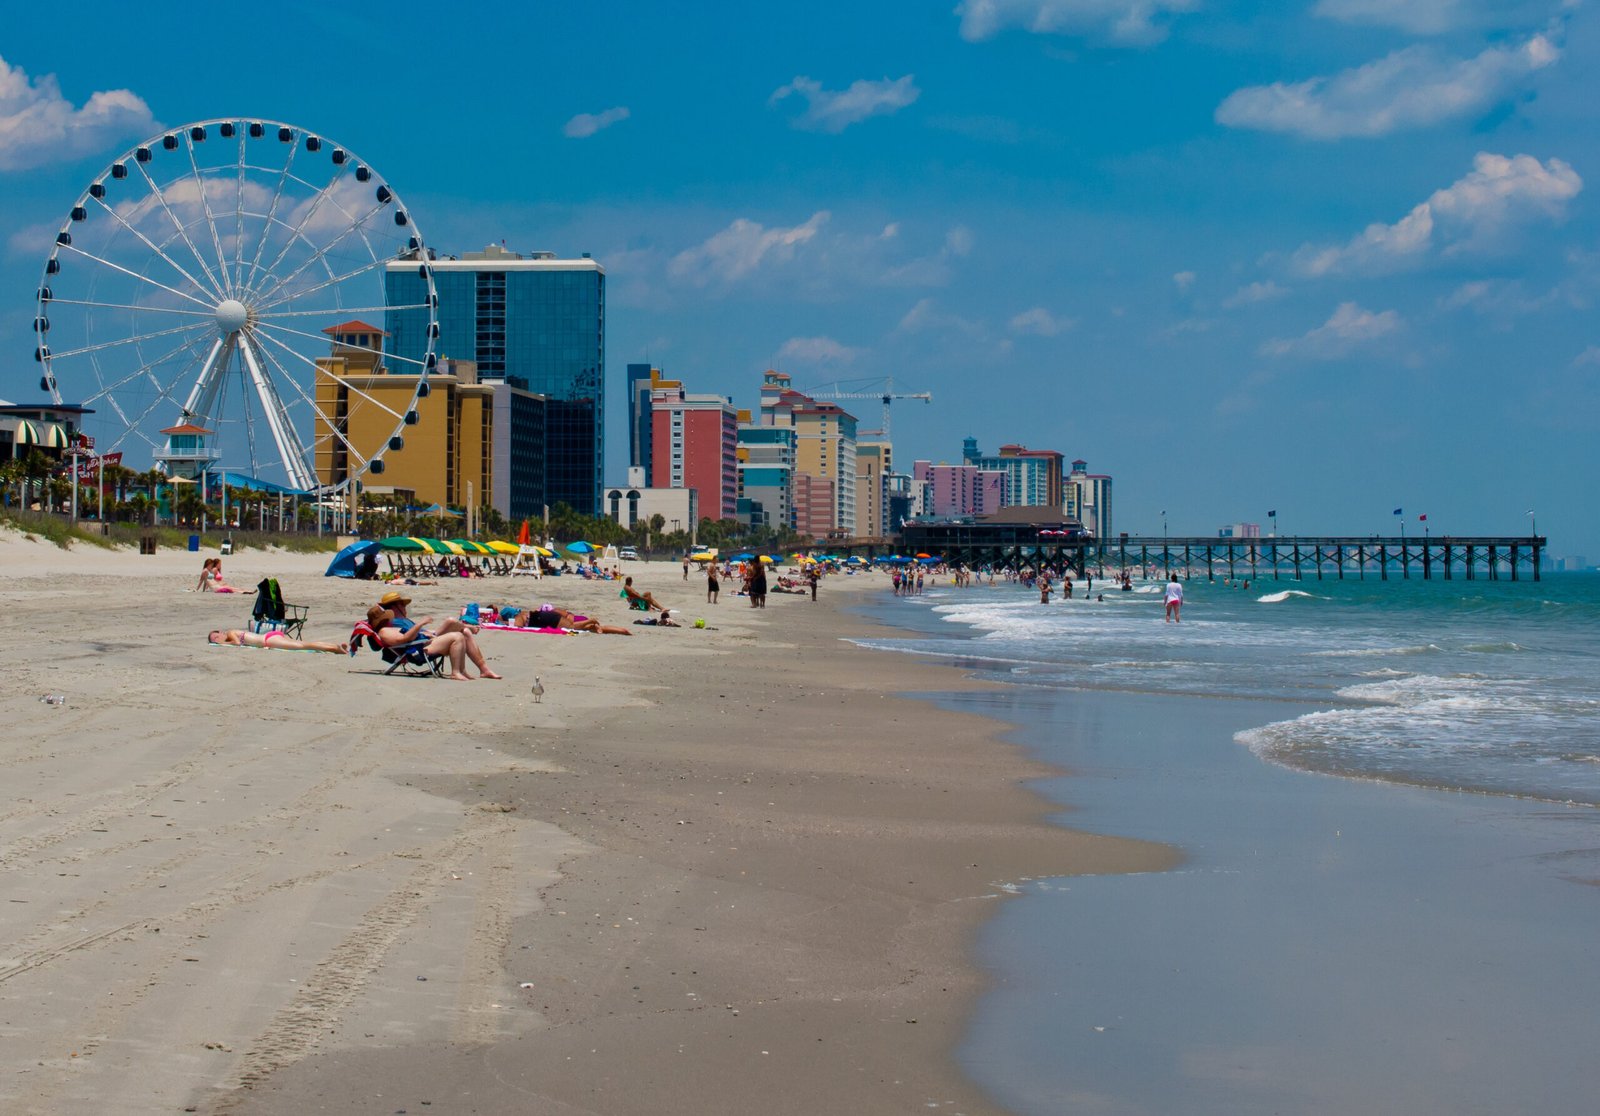 Shoreline of Myrtle Beach, south carolina, showing the ferris wheel, people relaxing on the beach and many colorful condos and sky rise buildings lining the shoreline. copy space available. all faces have been blurred out